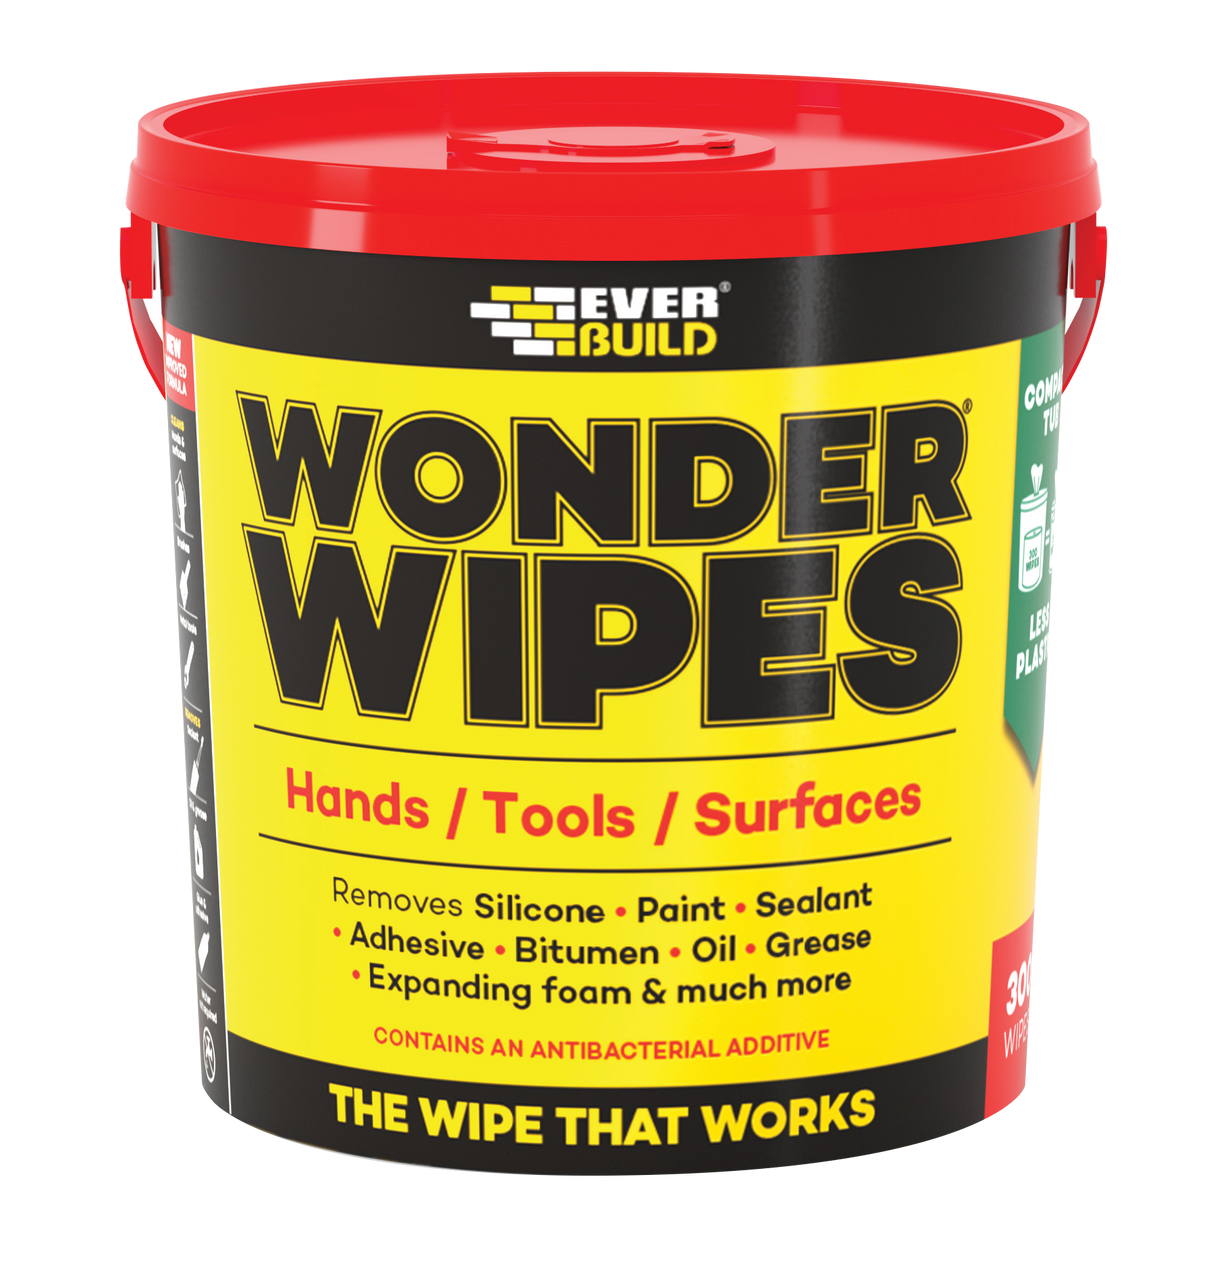 Everbuild Wonder Wipes Multi-Use Cleaning Wipes, Monster 500 Wipes